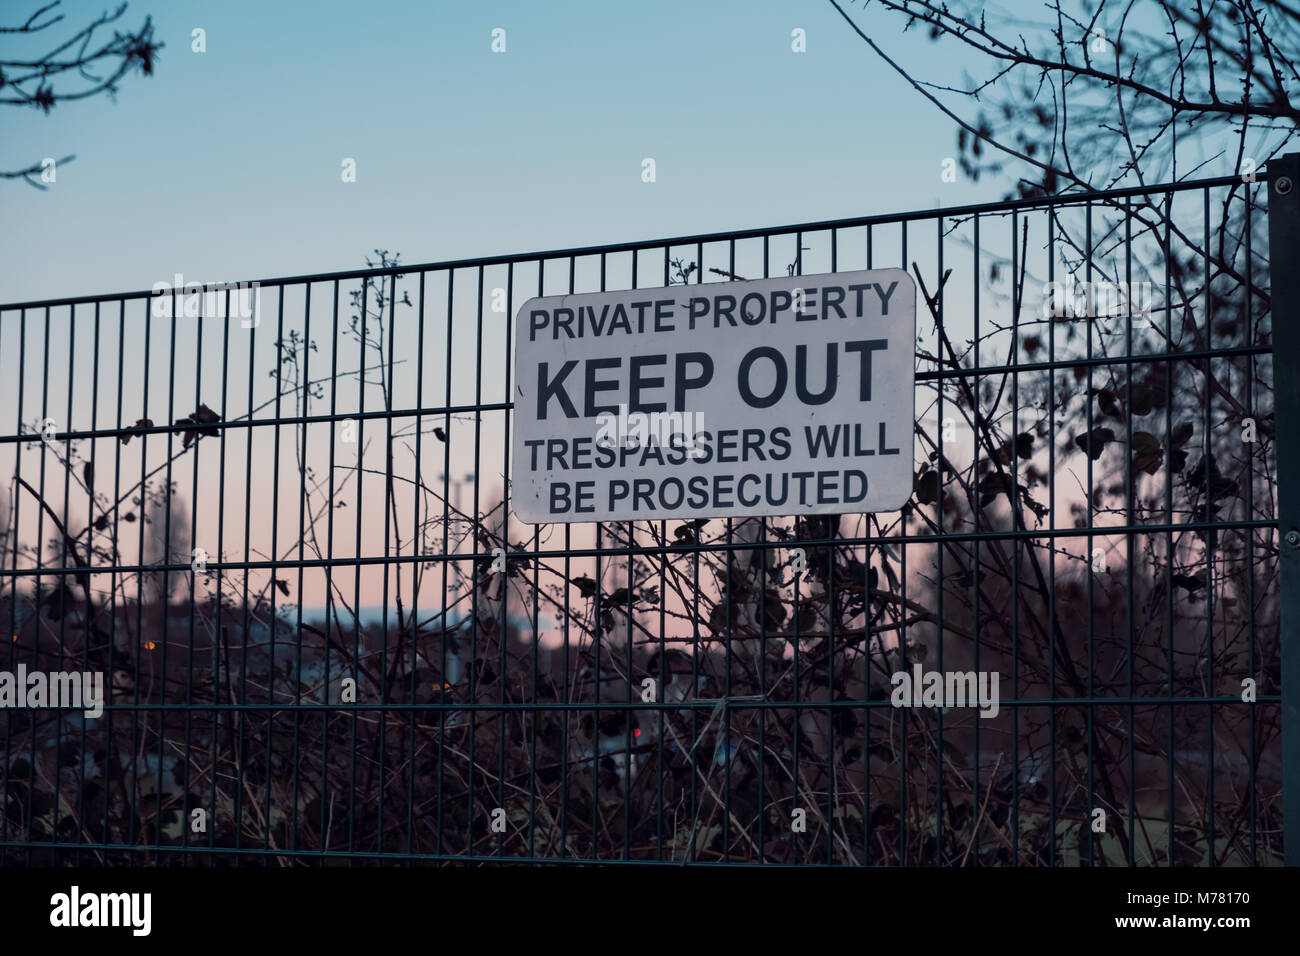 Keep Out sign on the perimeter fence of Dulwich Hamlet Football Club on the 8th March. These signs were put up by property developer Meadows, who own the grounds after their planning application was rejected by Southwark Council. Relations with the DHFC and Meadows  have deteriorated rapidly. Meadows have sent a £121,000 bill for back rent, and trademarked DHFC and Dulwich Hamlet Football Club. They have sent a cease and desist notice and locked DHFC out of the grounds. Stock Photo